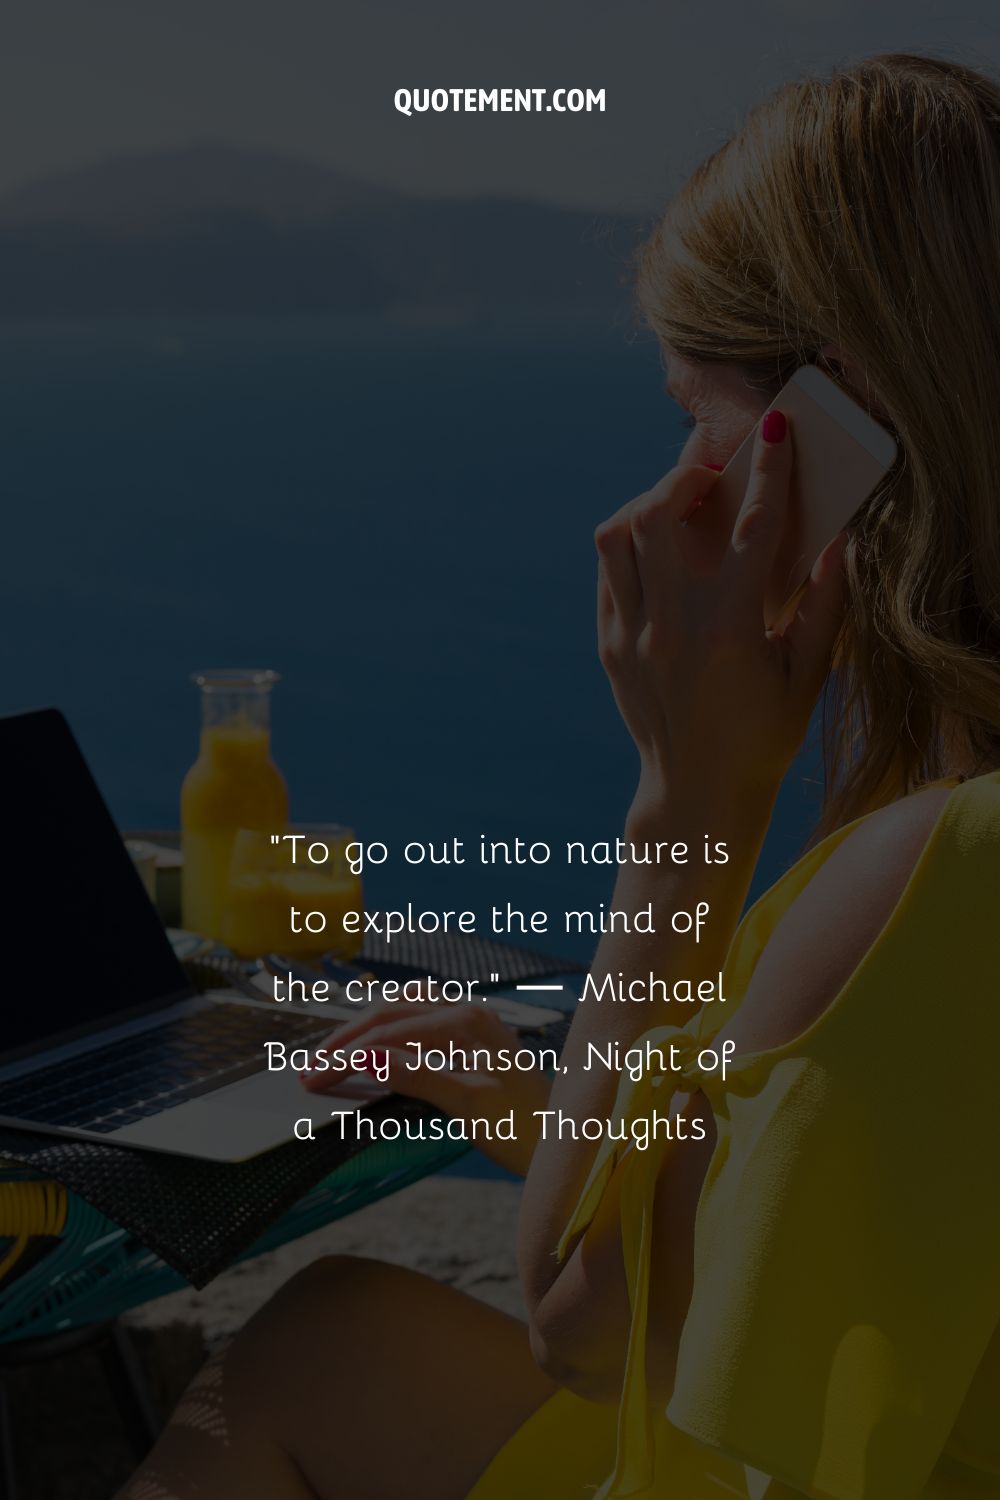 To go out into nature is to explore the mind of the creator.